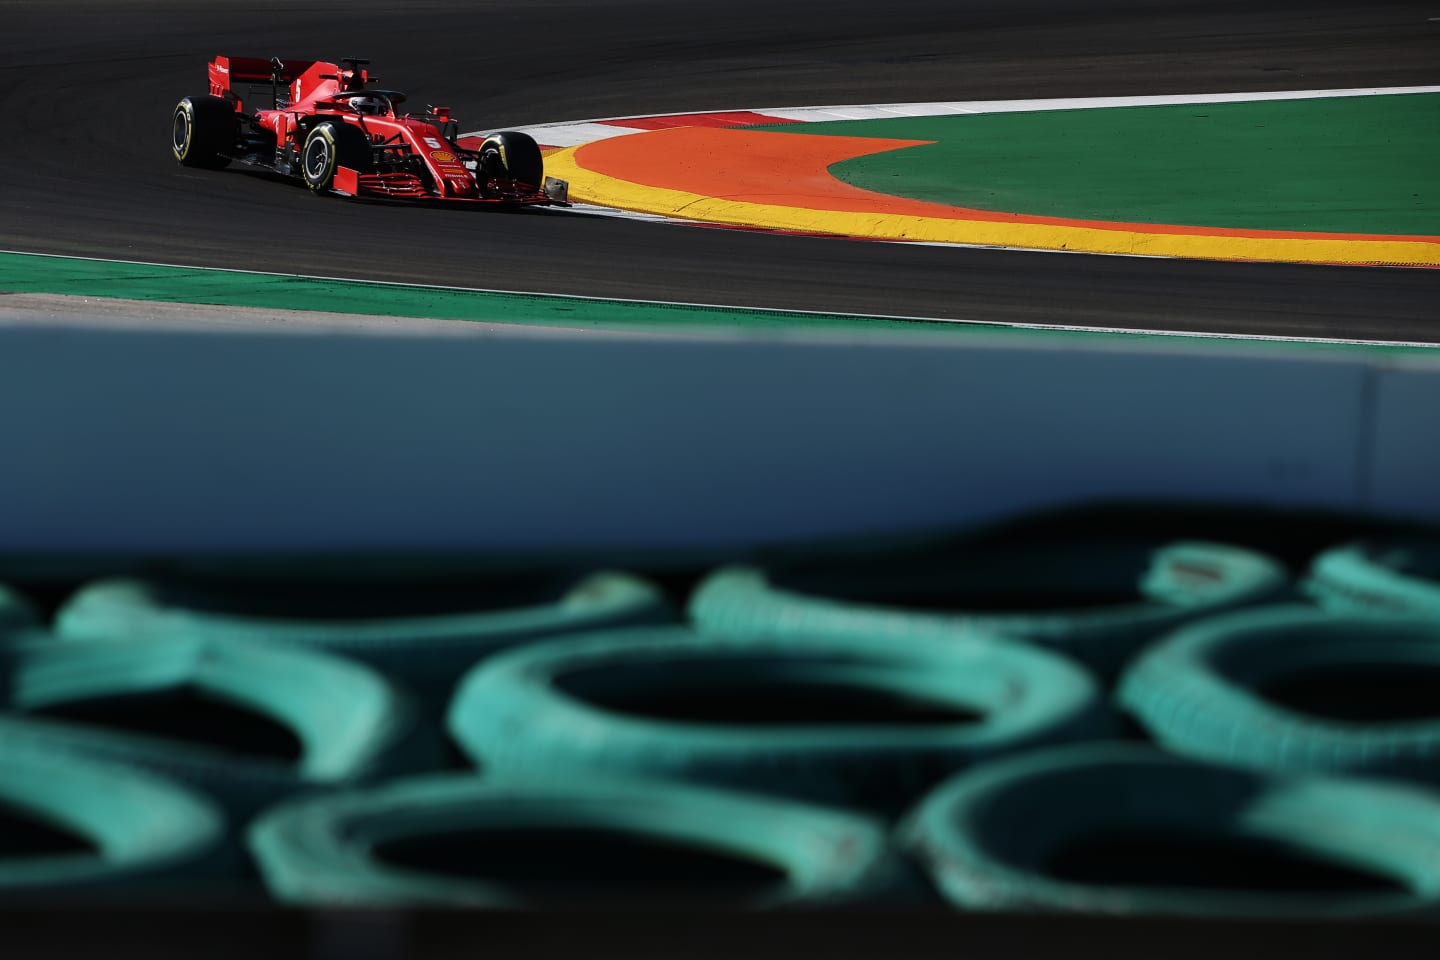 PORTIMAO, PORTUGAL - OCTOBER 23: Sebastian Vettel of Germany driving the (5) Scuderia Ferrari SF1000 on track during practice ahead of the F1 Grand Prix of Portugal at Autodromo Internacional do Algarve on October 23, 2020 in Portimao, Portugal. (Photo by Jose Sena Goulao - Pool/Getty Images)